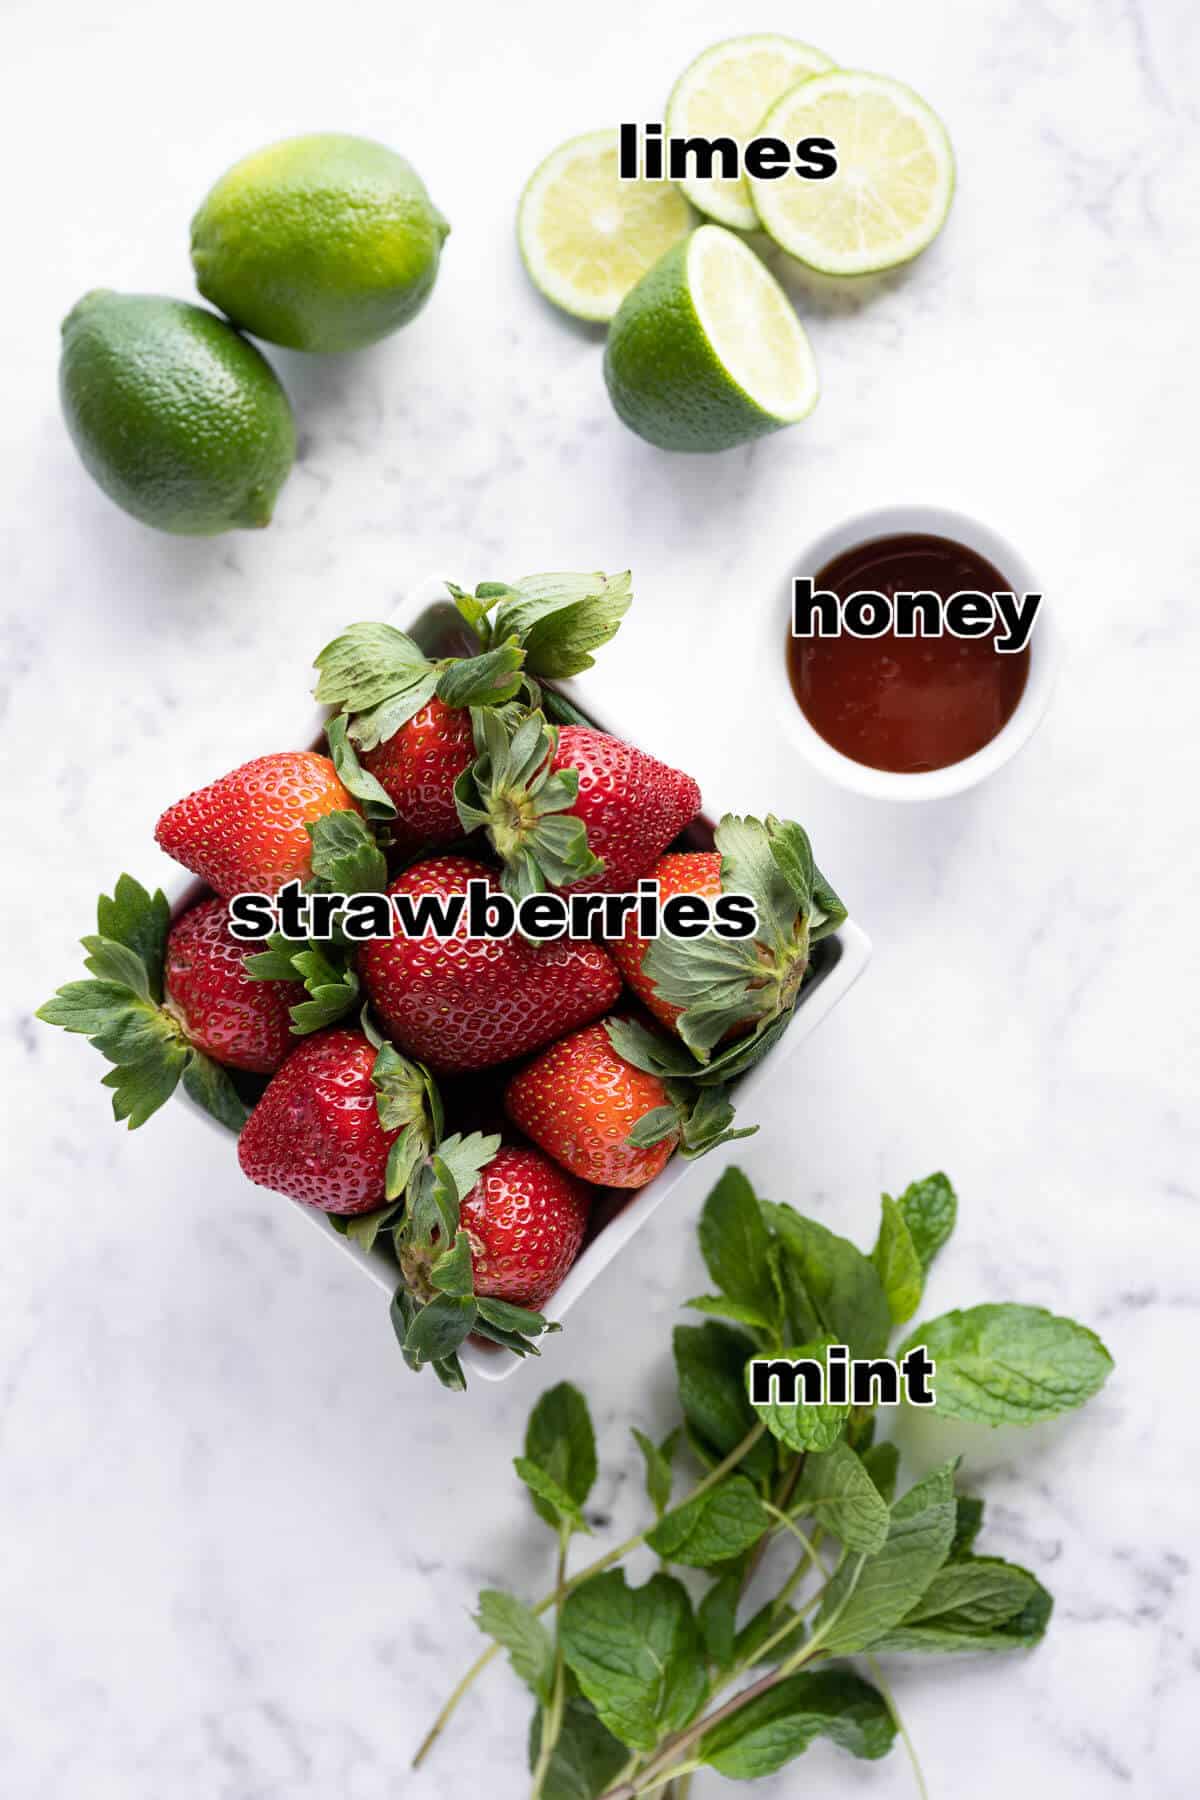 Ingredients for a strawberry mocktail: limes, strawberries, honey, and mint.